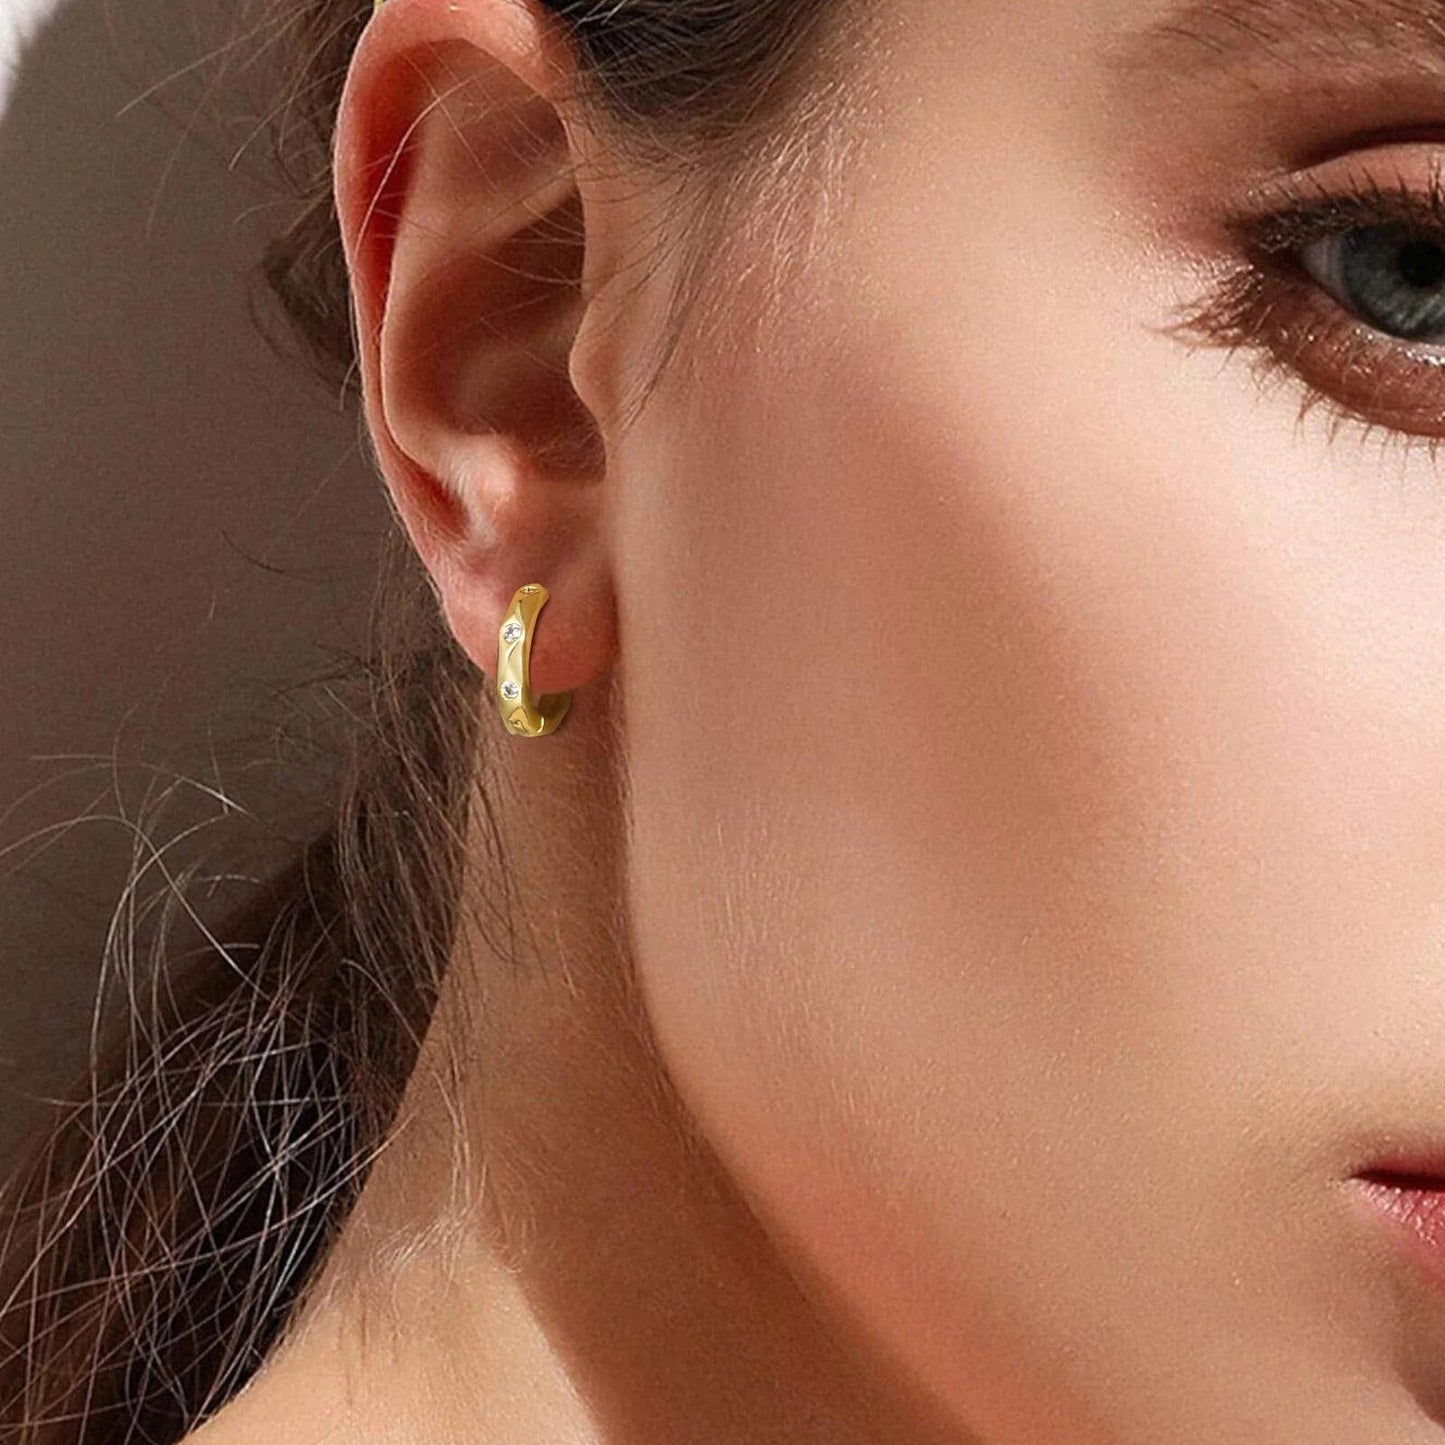 Women's Earrings Aretes para mujeres Women Small Hoop Earrings, Gold Plated Hoops with Sparking Cubic Zirconia Stone, Chic Dainty Girls Huggies